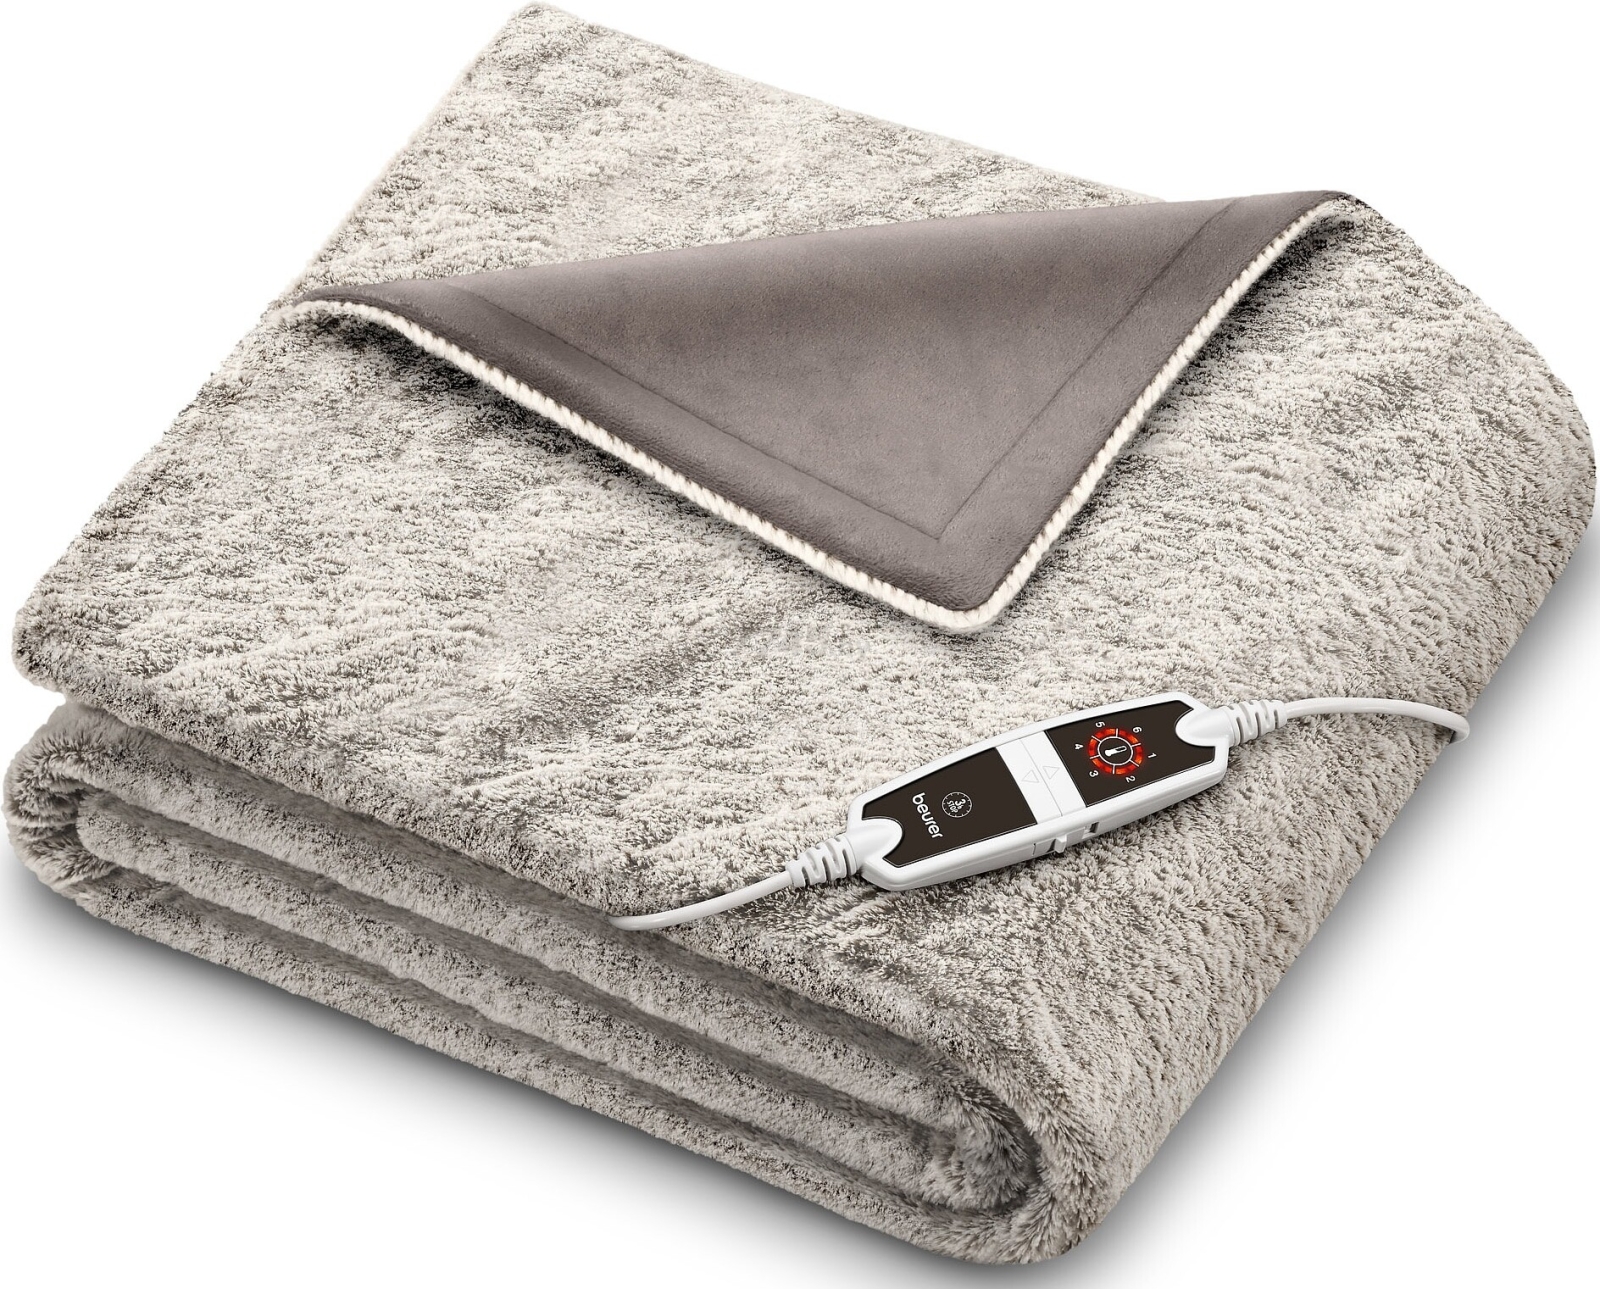 Электроодеяло BEURER HD 150 XXL Nordic Cosy Taupe (HD150XXL)